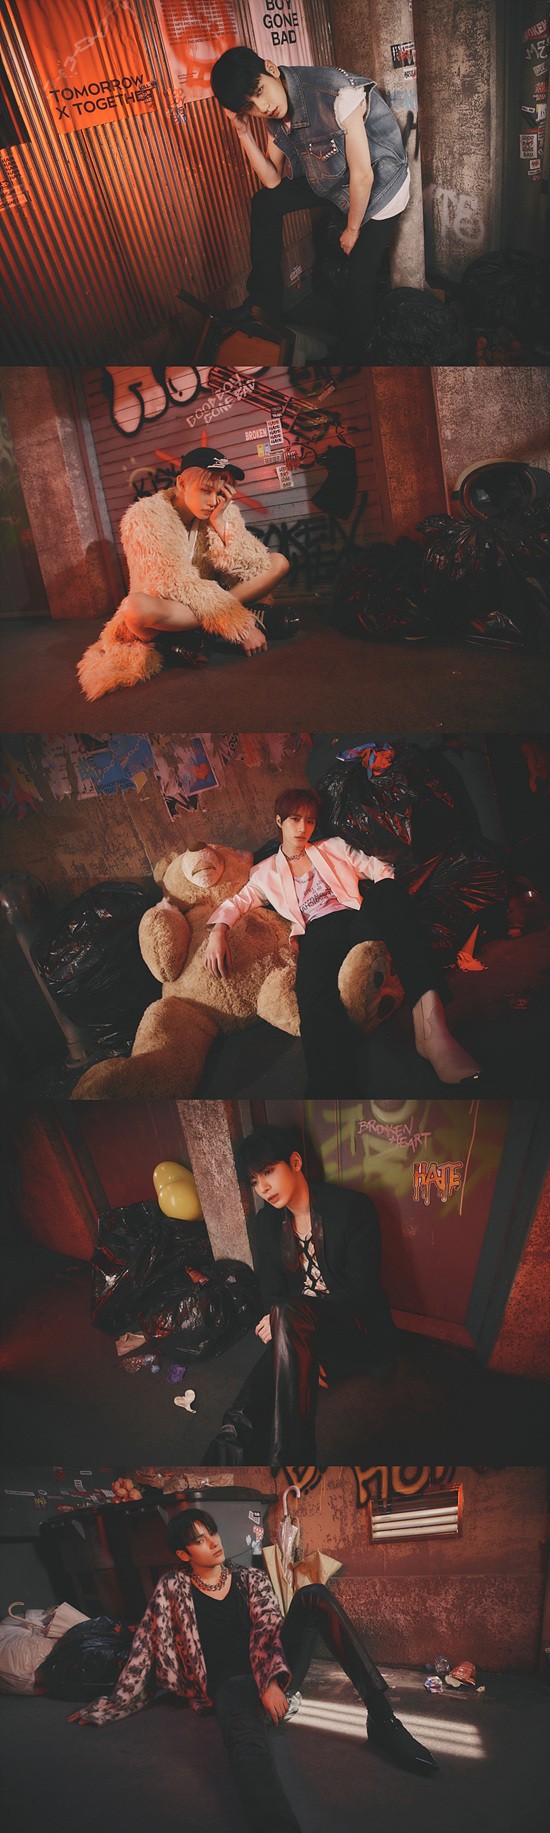 Good Boy Gone Bad.TOMORROW X TOGETHER (hereinafter referred to as TXT) will be back as Dark Boy, releasing the complex Feelings that go through after experiencing their first breakup with music.TXT released a concept photo of its mini-fourth album, Minisode 2: Thursdays Child, on its official website at midnight on the 23rd.The photo is a version of Mess (MESS), which shows Boy confused by the idea that everything has gone awry after his first breakup.TXT was on a narrow, dead end, with items abandoned that contained memories of lovers, including balloons, helmets and umbrellas.I was curious with a poster with the phrase Good Boy Gone Bad.The members emanated a dark aura with a monotone sensational look, looking at the camera with complex eyes as if hurt by the breakup, especially with lipstick marks spreading around their mouths.TXT released its unique presence last year with the Chaos Chapter series, with its regular second album, Chaos Chapter: Freeze, reaching number five on the US Billboard main album chart Billboard 200.Minisod 2: The Thursdays Child will be shown before the release of the next series of Chaos Chapters: It took a career high, breaking 810,000 pre-order volumes in six days of booking sales.TXT will release a concept clip for the Mess version on Monday, and will return to the new album on the 9th of next month.